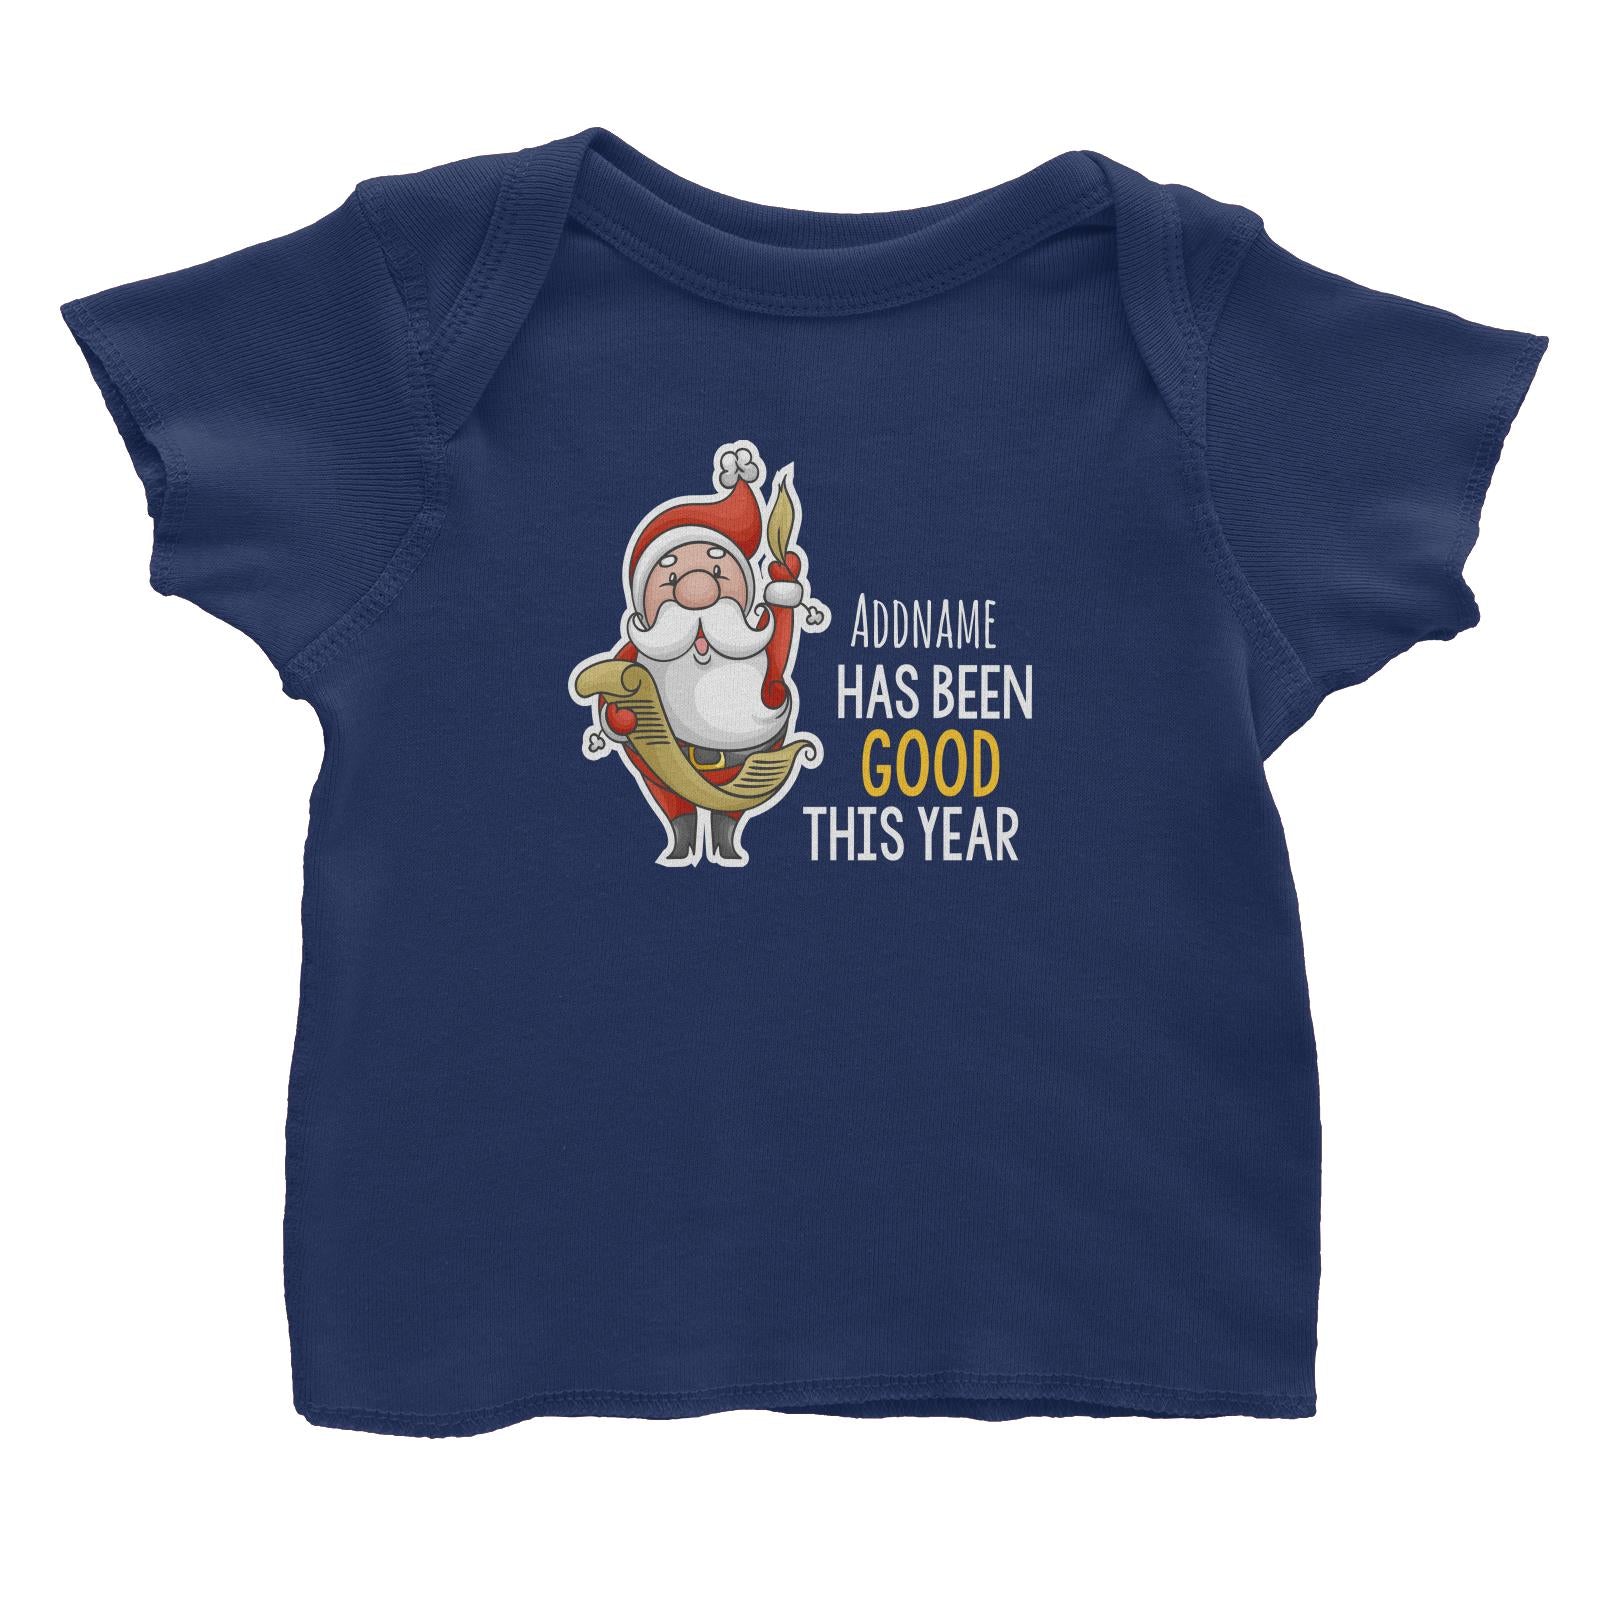 Santa Says Addname Has Been Good This Year Baby T-Shirt Christmas Matching Family Personalizable Designs Cute